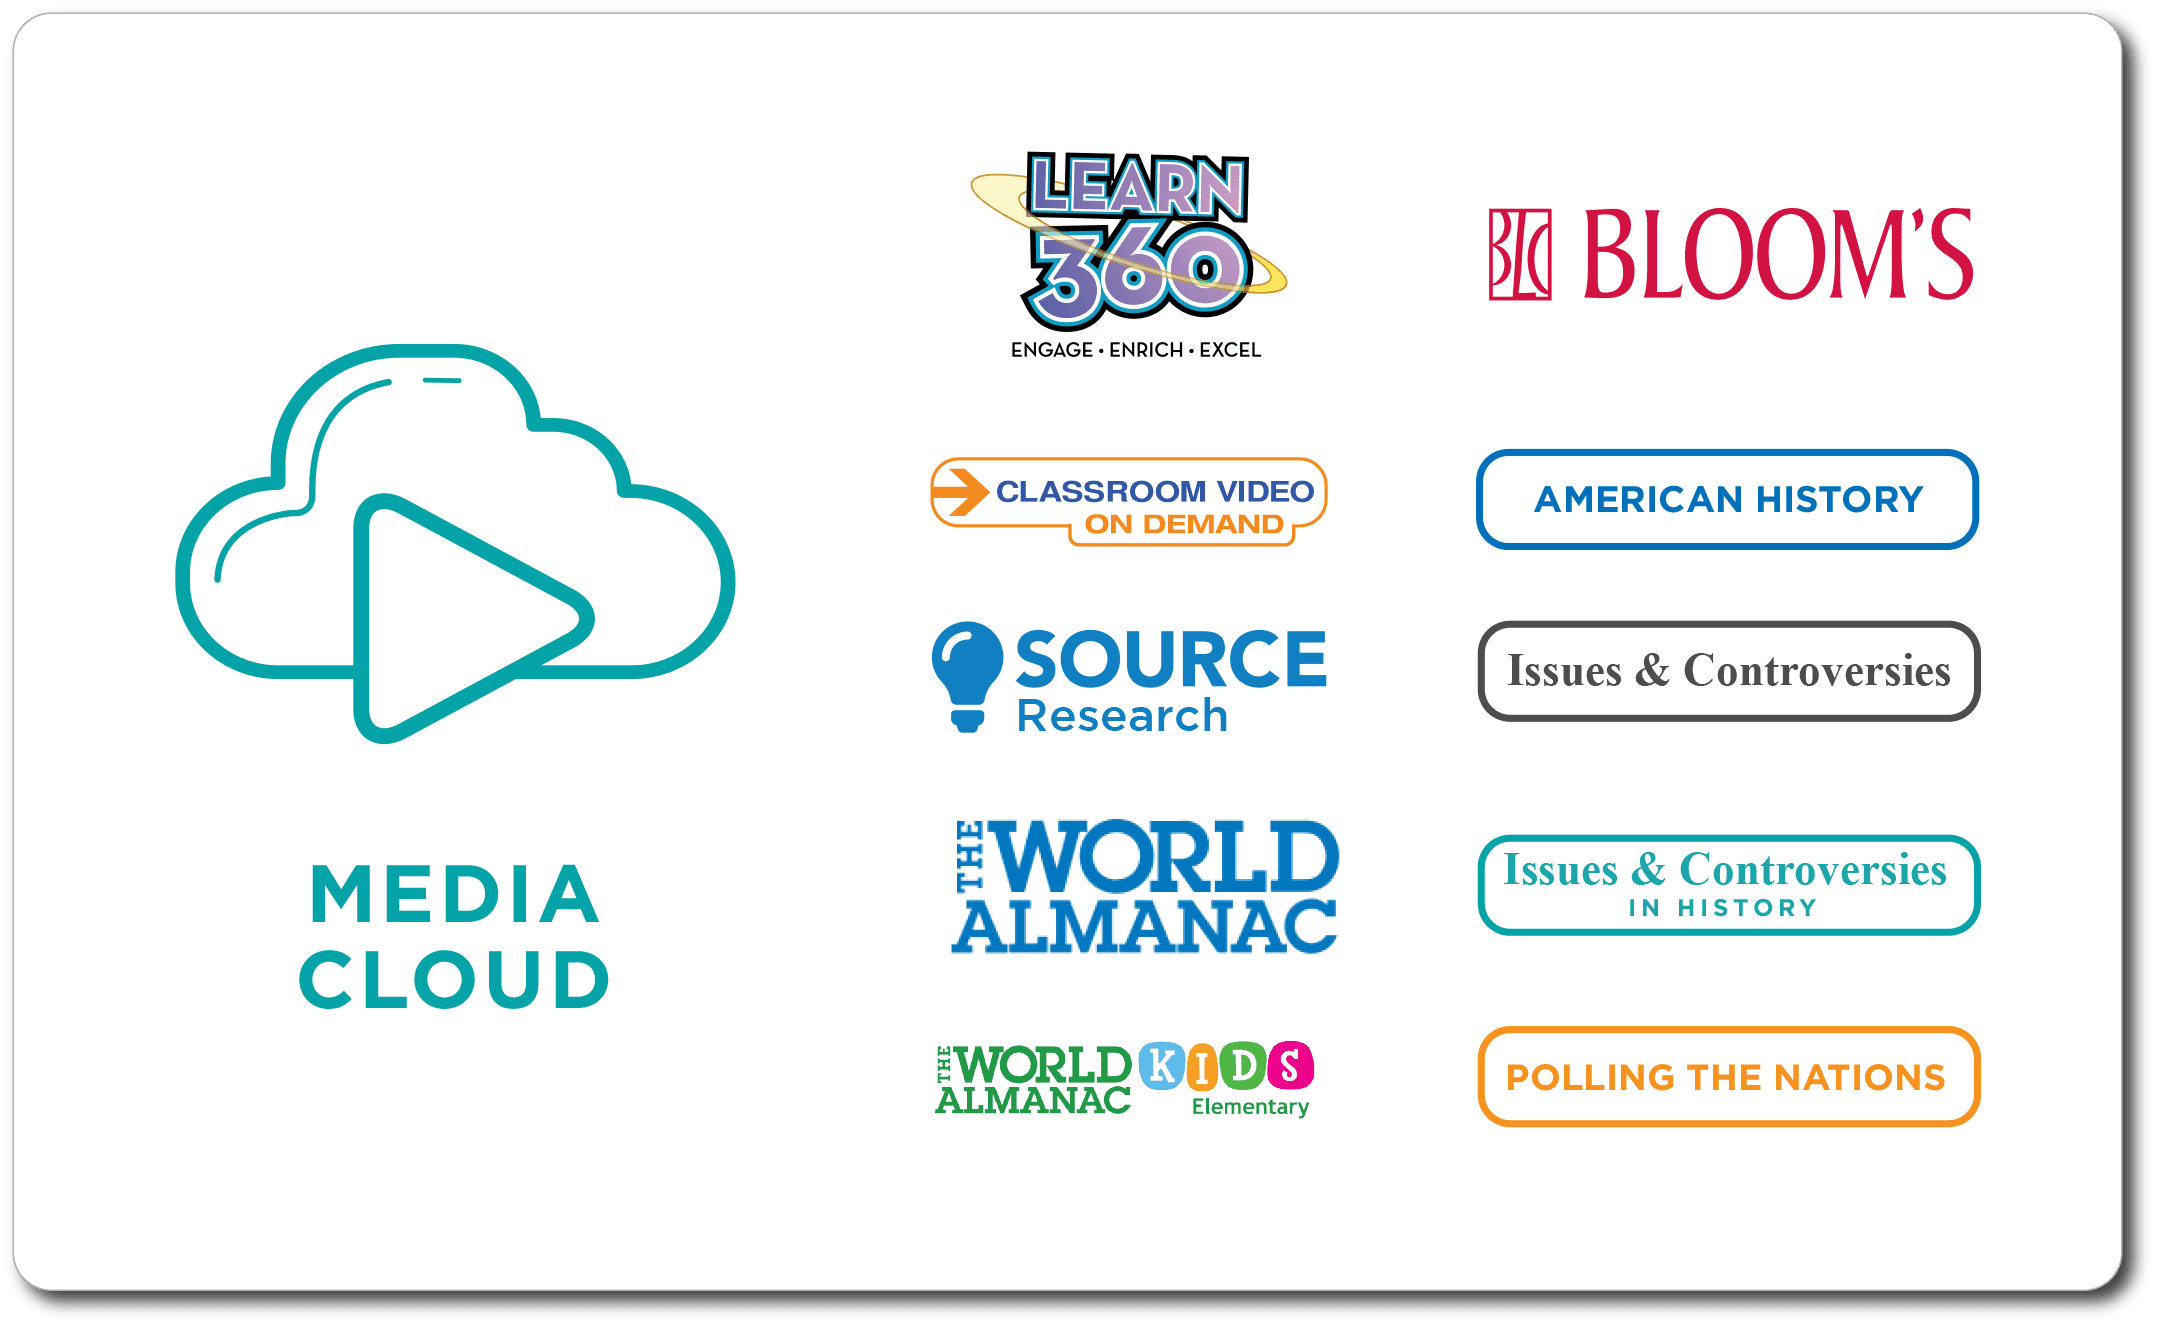 Media Cloud includes Learn360, Classroom Video on Demand, Source Reference, World Almanac, World Almanac for Kids, Blooms, American History, Issues and Controversies, Issues and Controversies in History and Polling the Nations